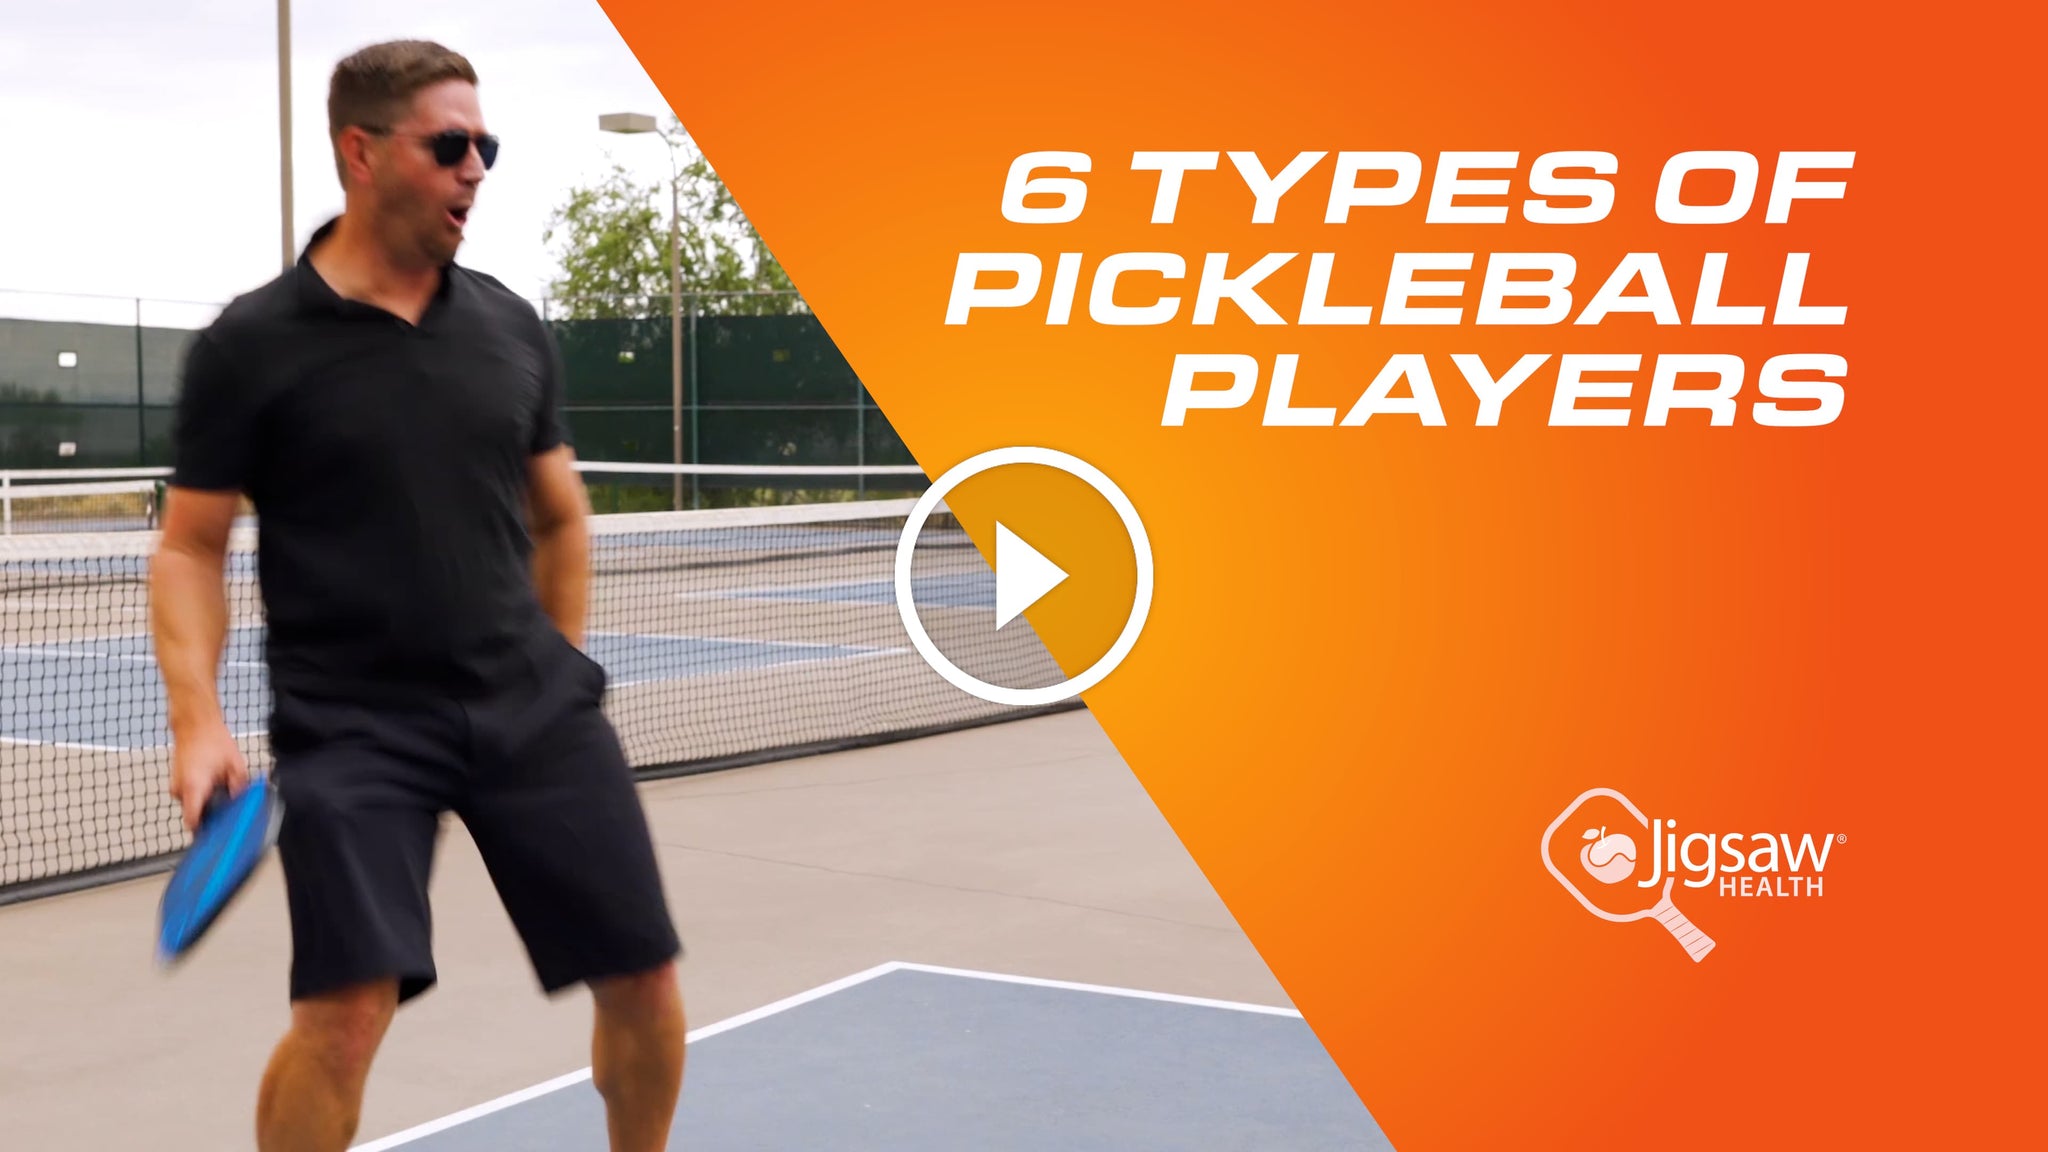 6 Types of Pickleball Players | #FunnyFriday